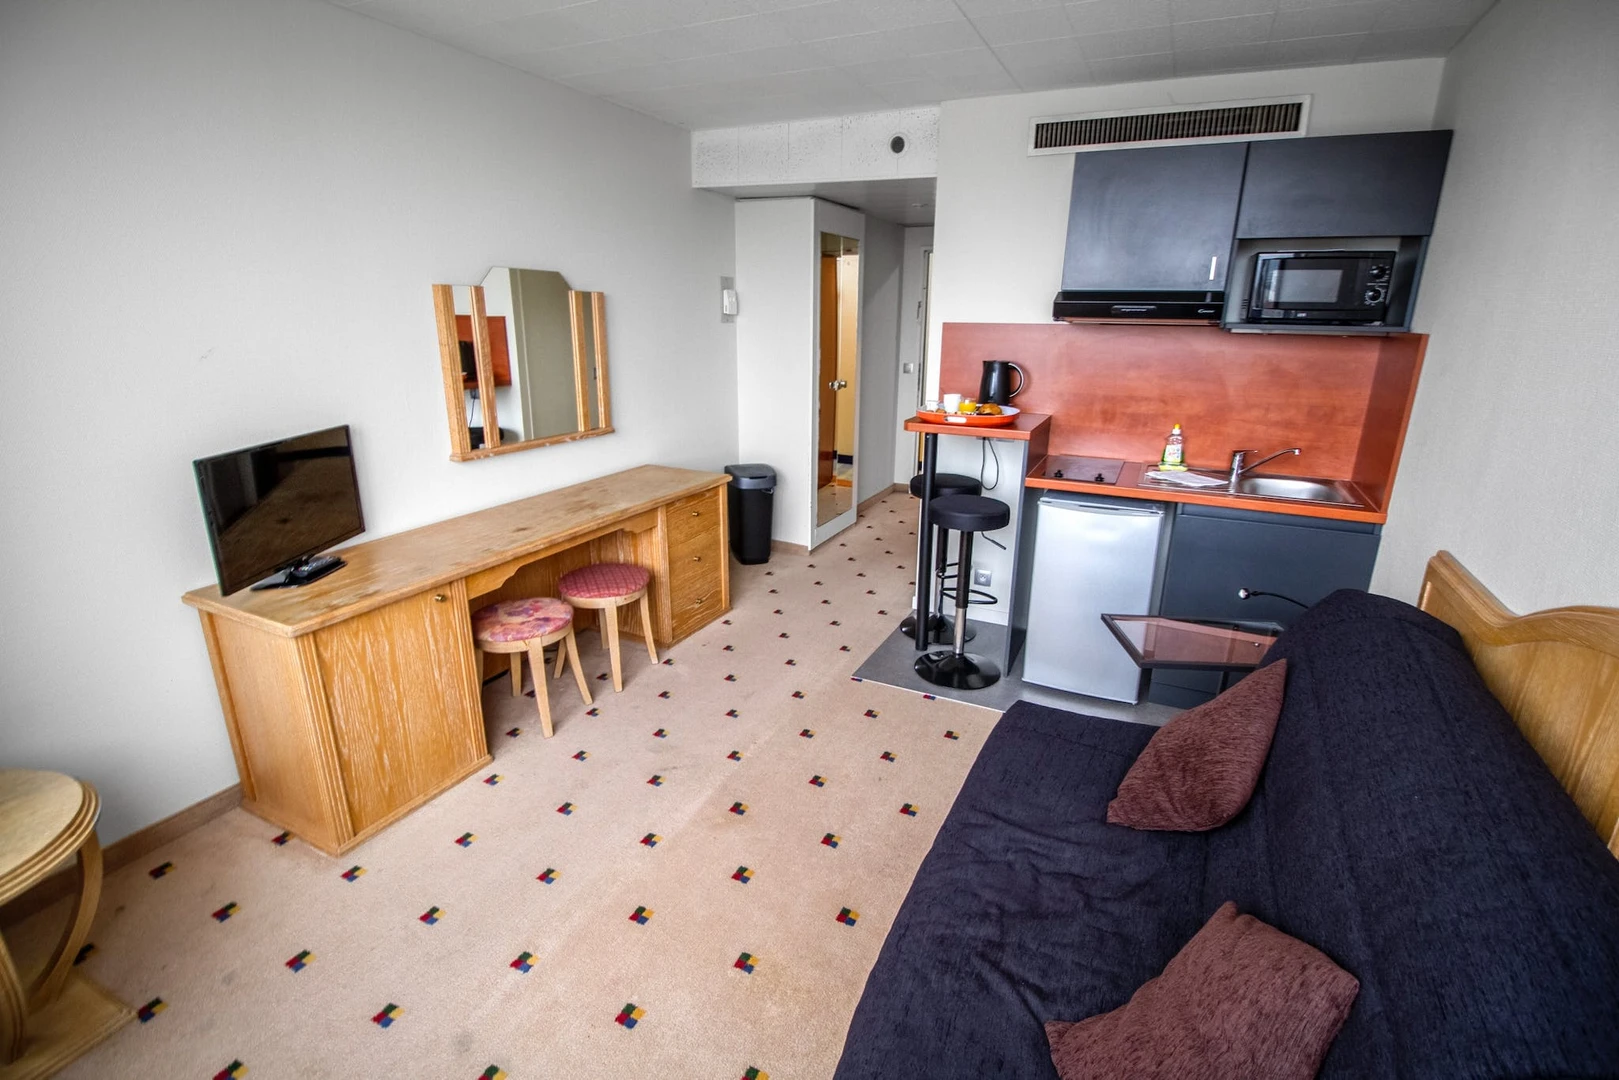 Accommodation in the centre of Nancy